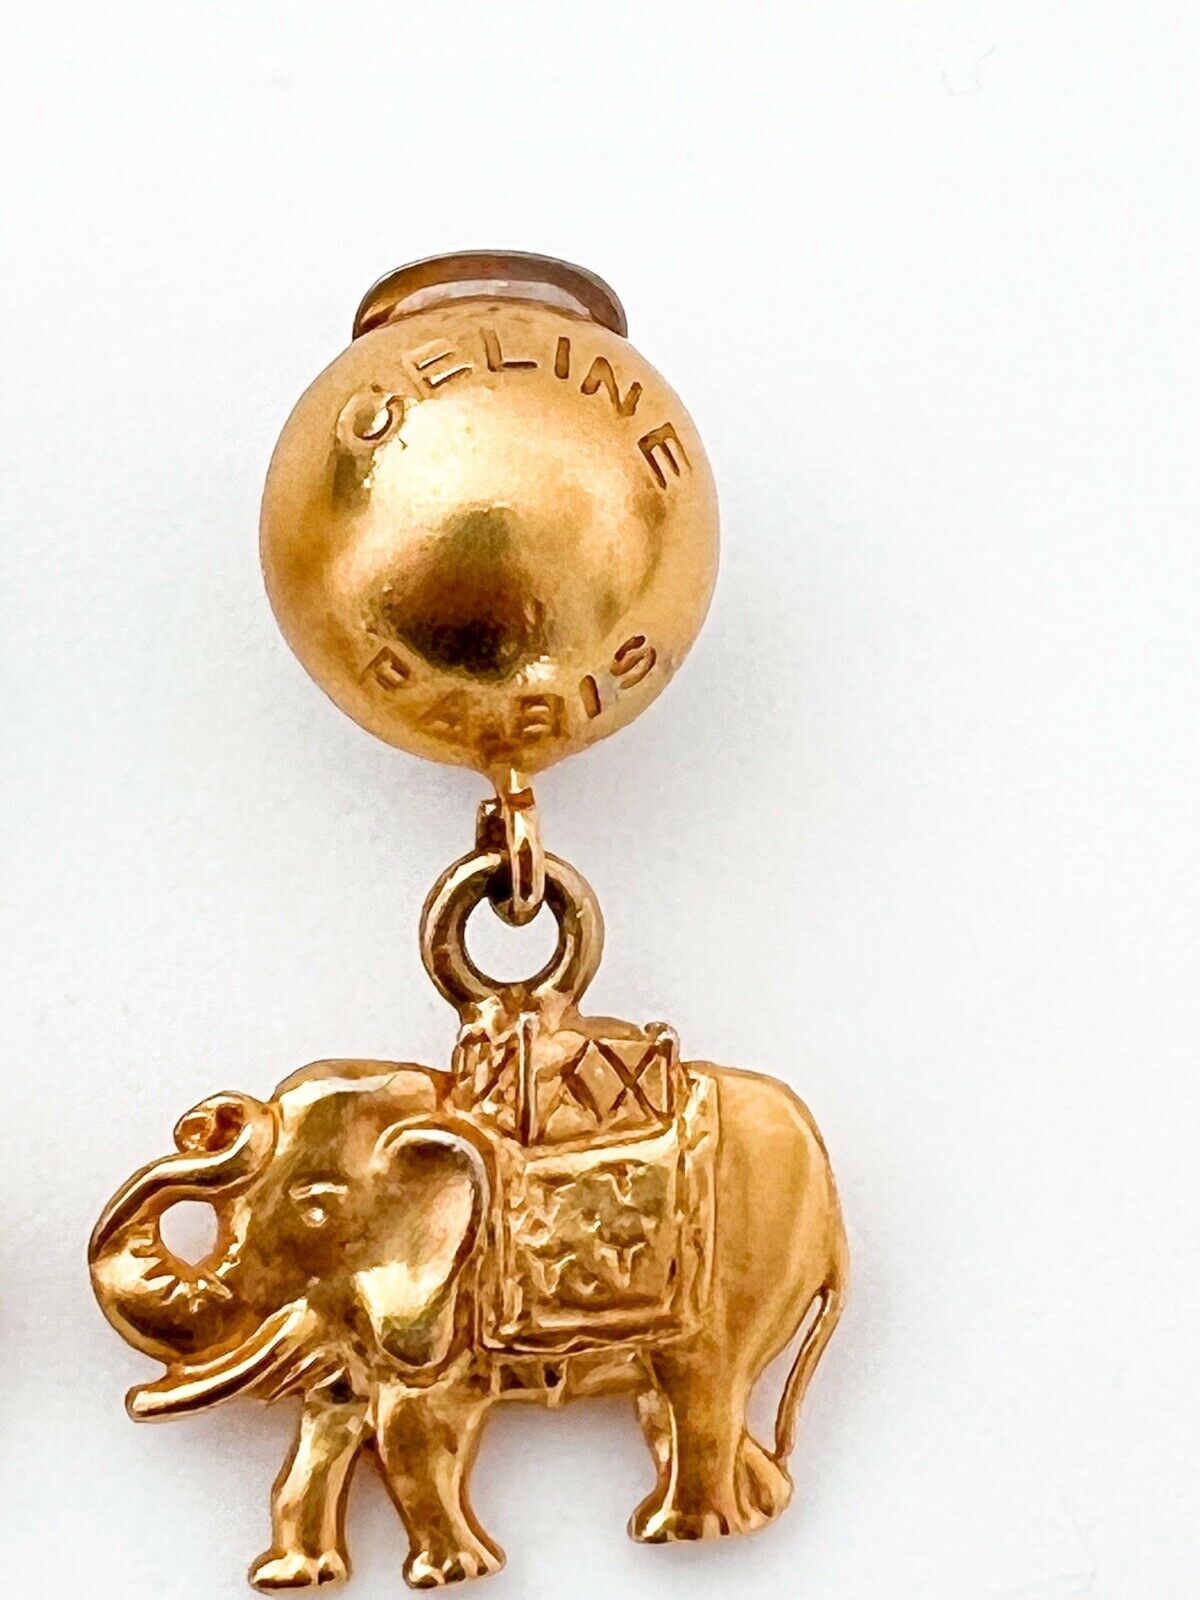 【SOLD OUT】Celine Paris Vintage Earrings Gold Tone Dangling Elephant Made in Italy